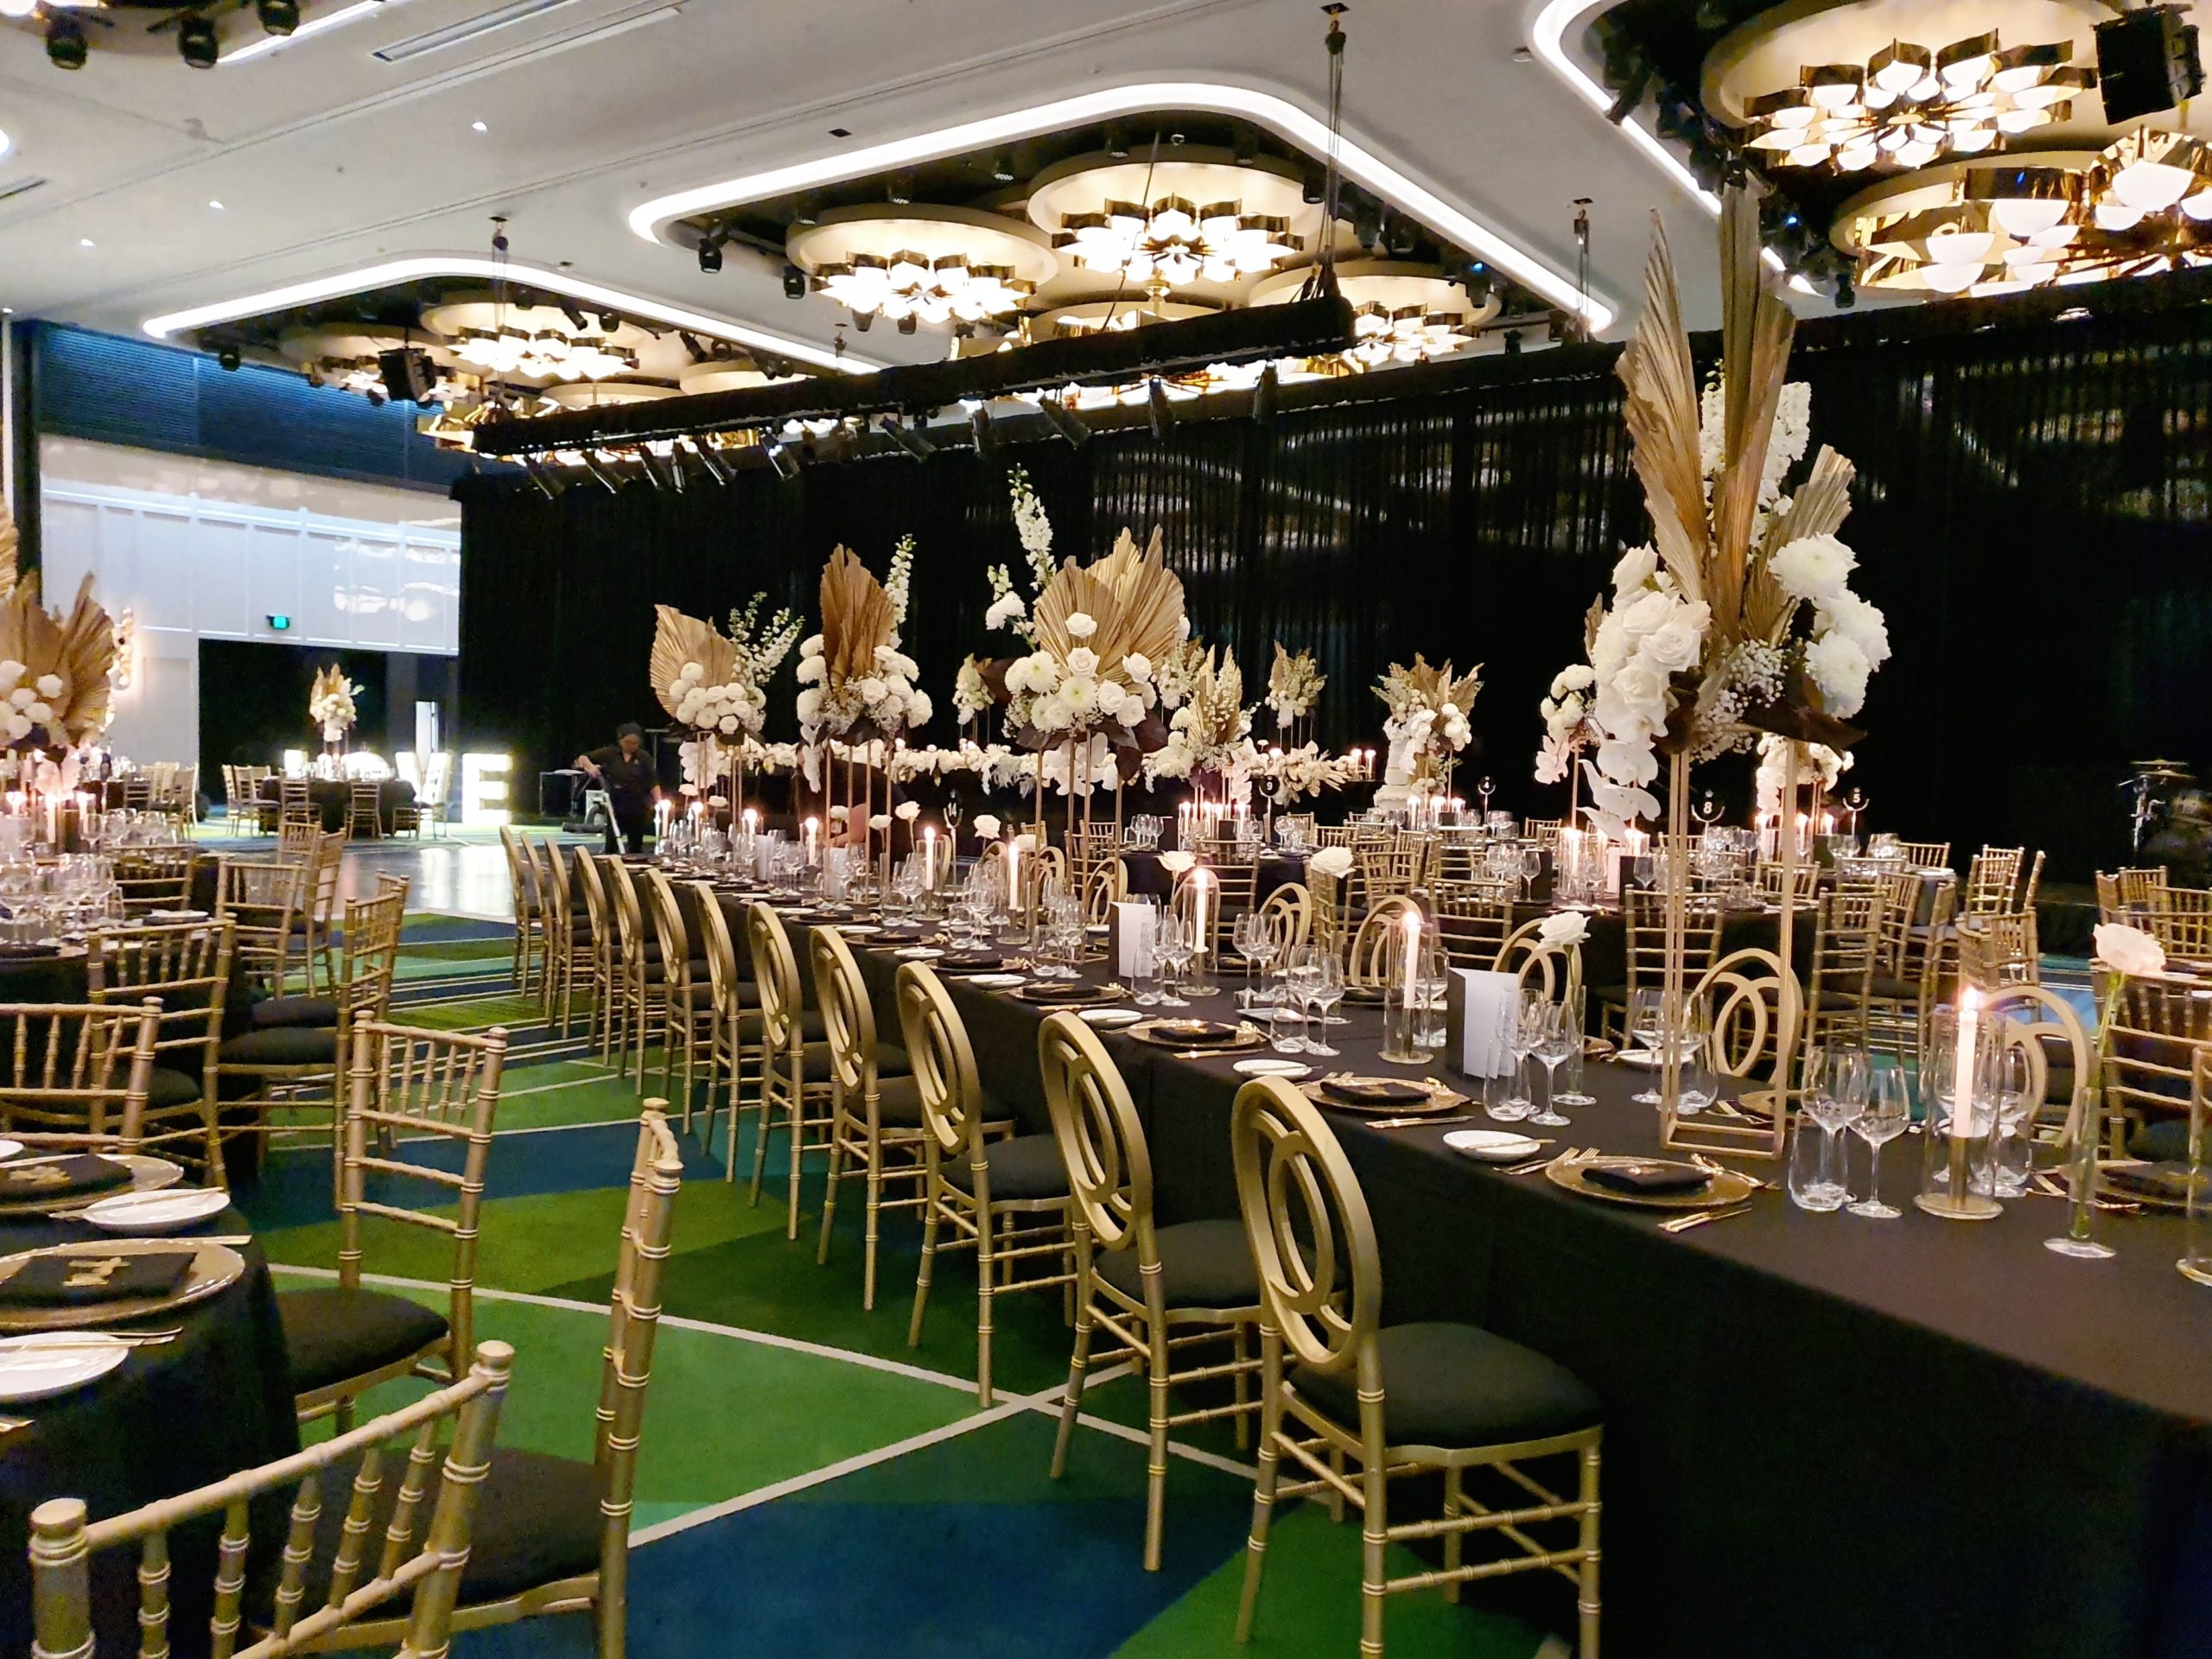 gold wedding chair hire Perth <a href='#' class='view-taggged-products' data-id=2819>Click to View Products</a><div class='taggged-products-slider-wrap'><div class='heading-tag-products'></div><div class='taggged-products-slider'></div></div><div class='loading-spinner'><i class='fa fa-spinner fa-spin'></i></div>